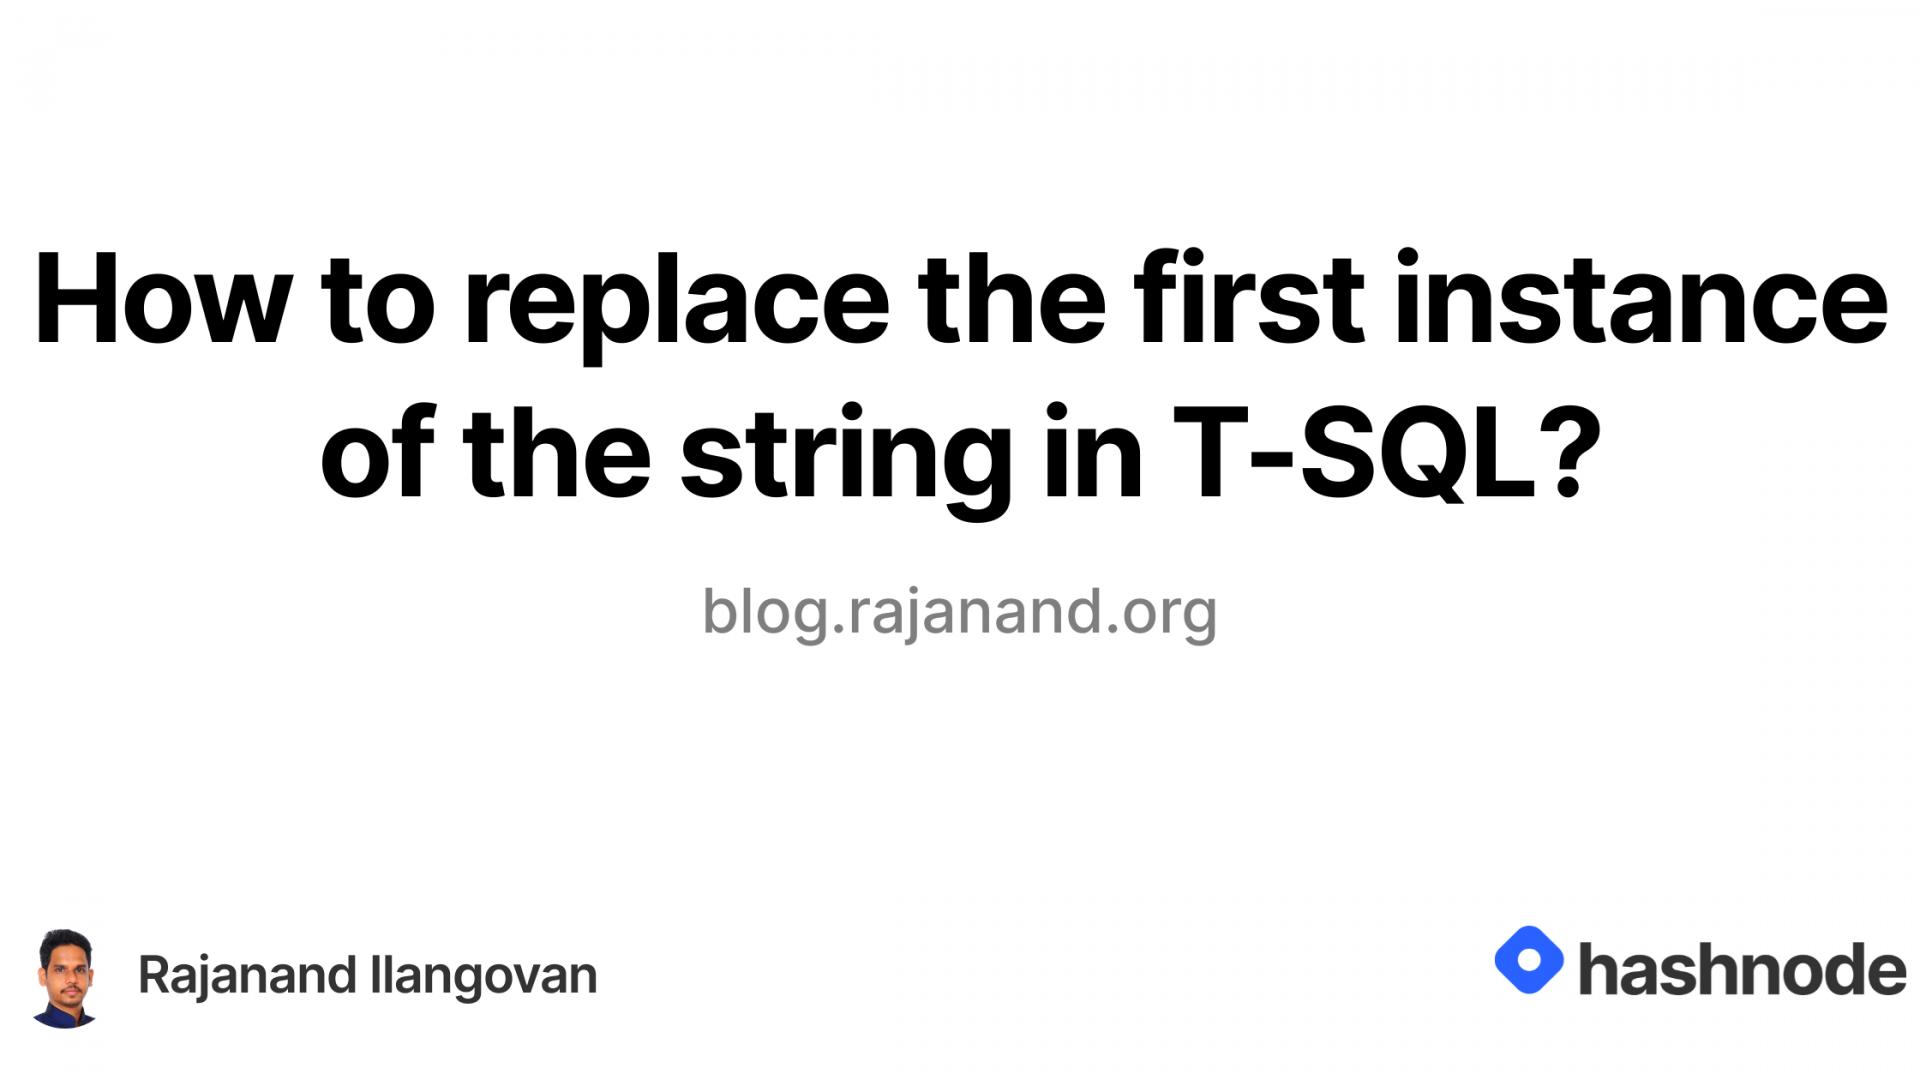 How to replace the first instance of the string in T-SQL?